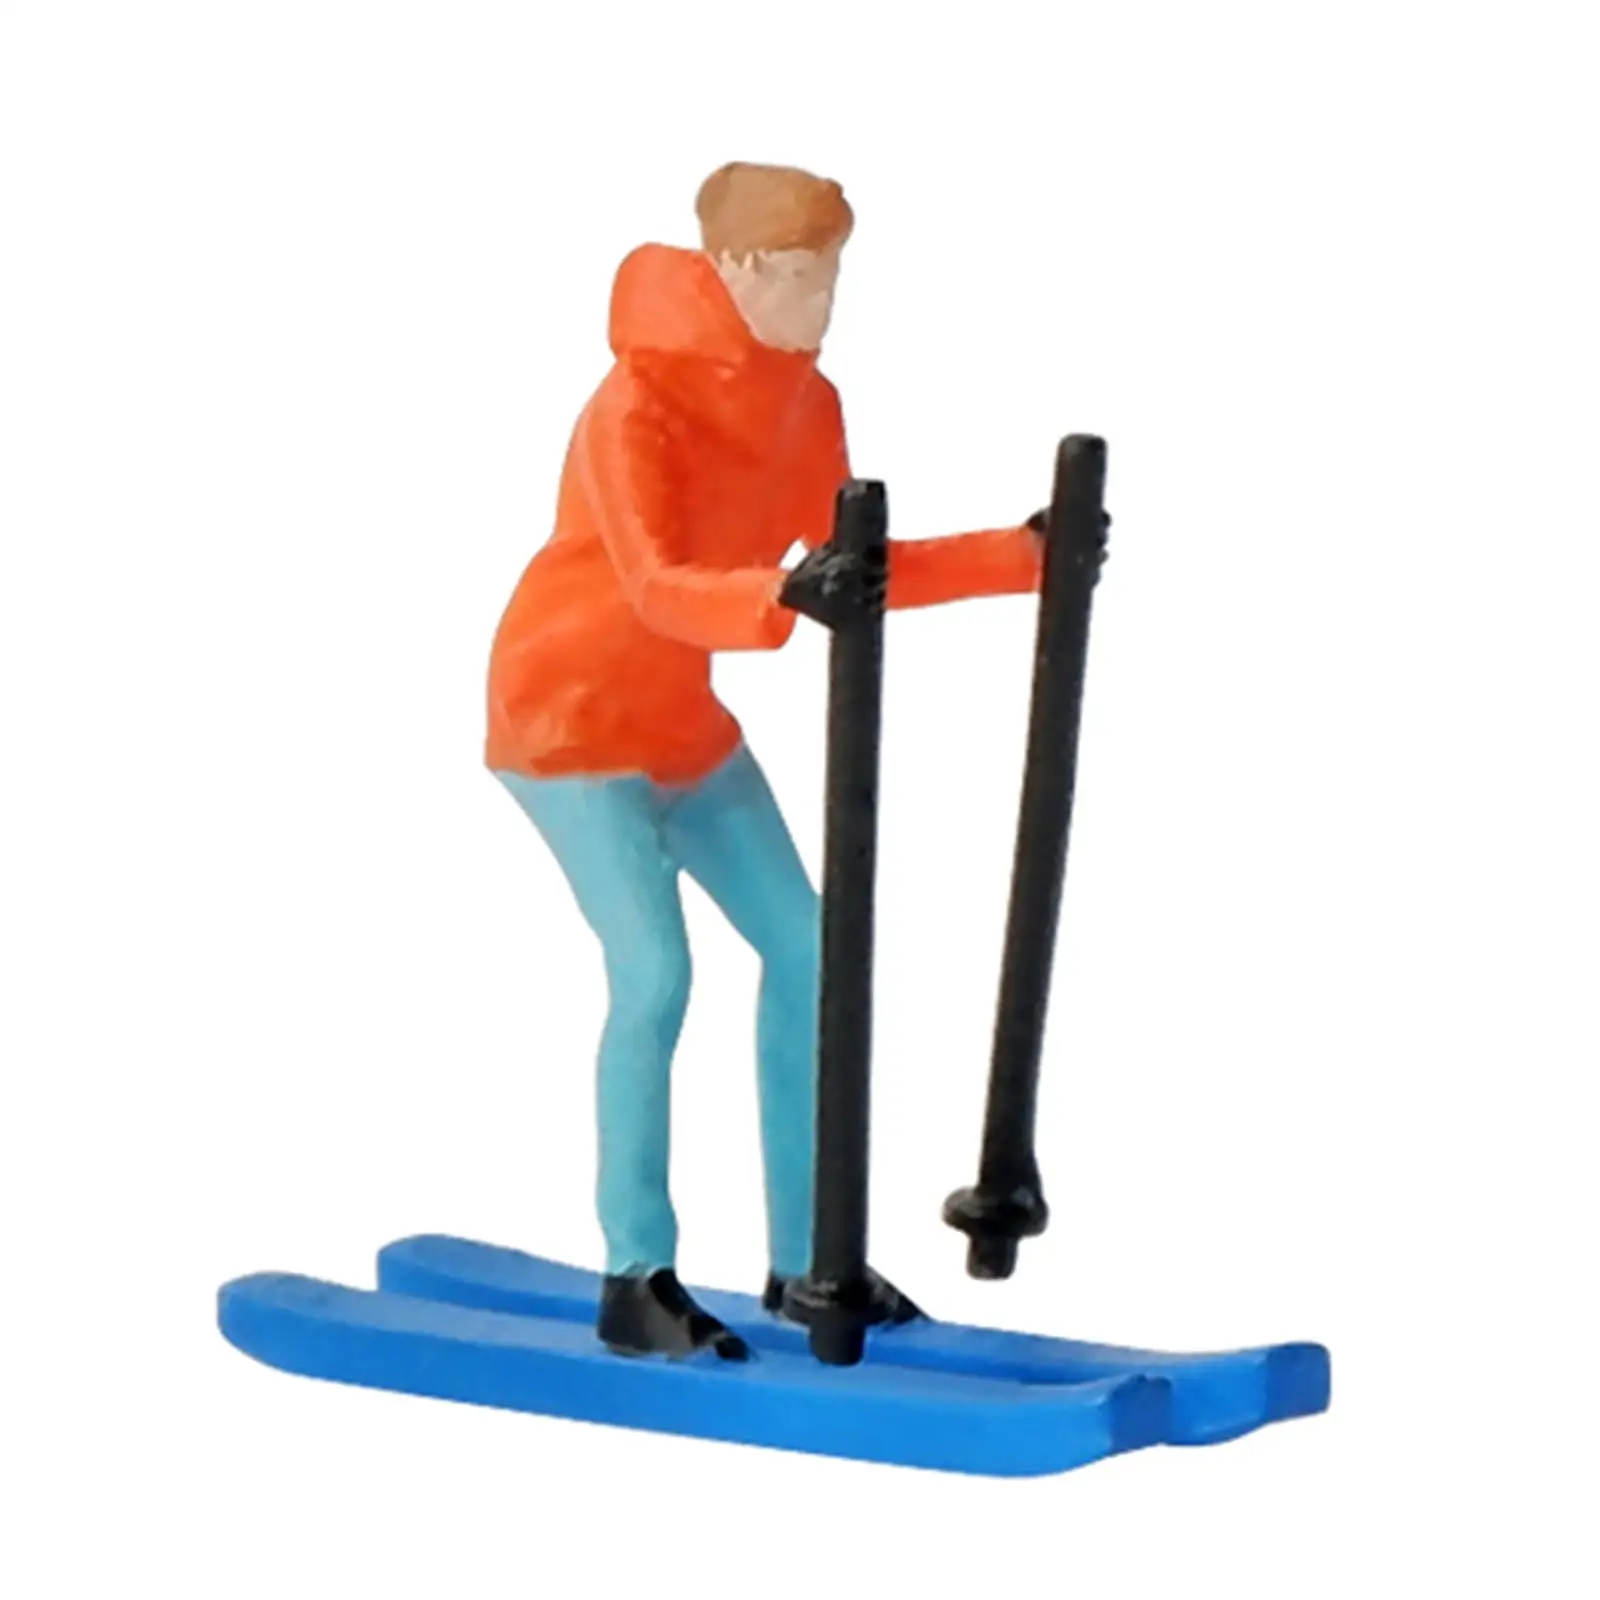 1/64 Scale Miniature Model Skiing Figures Ornament for DIY Projects Layout